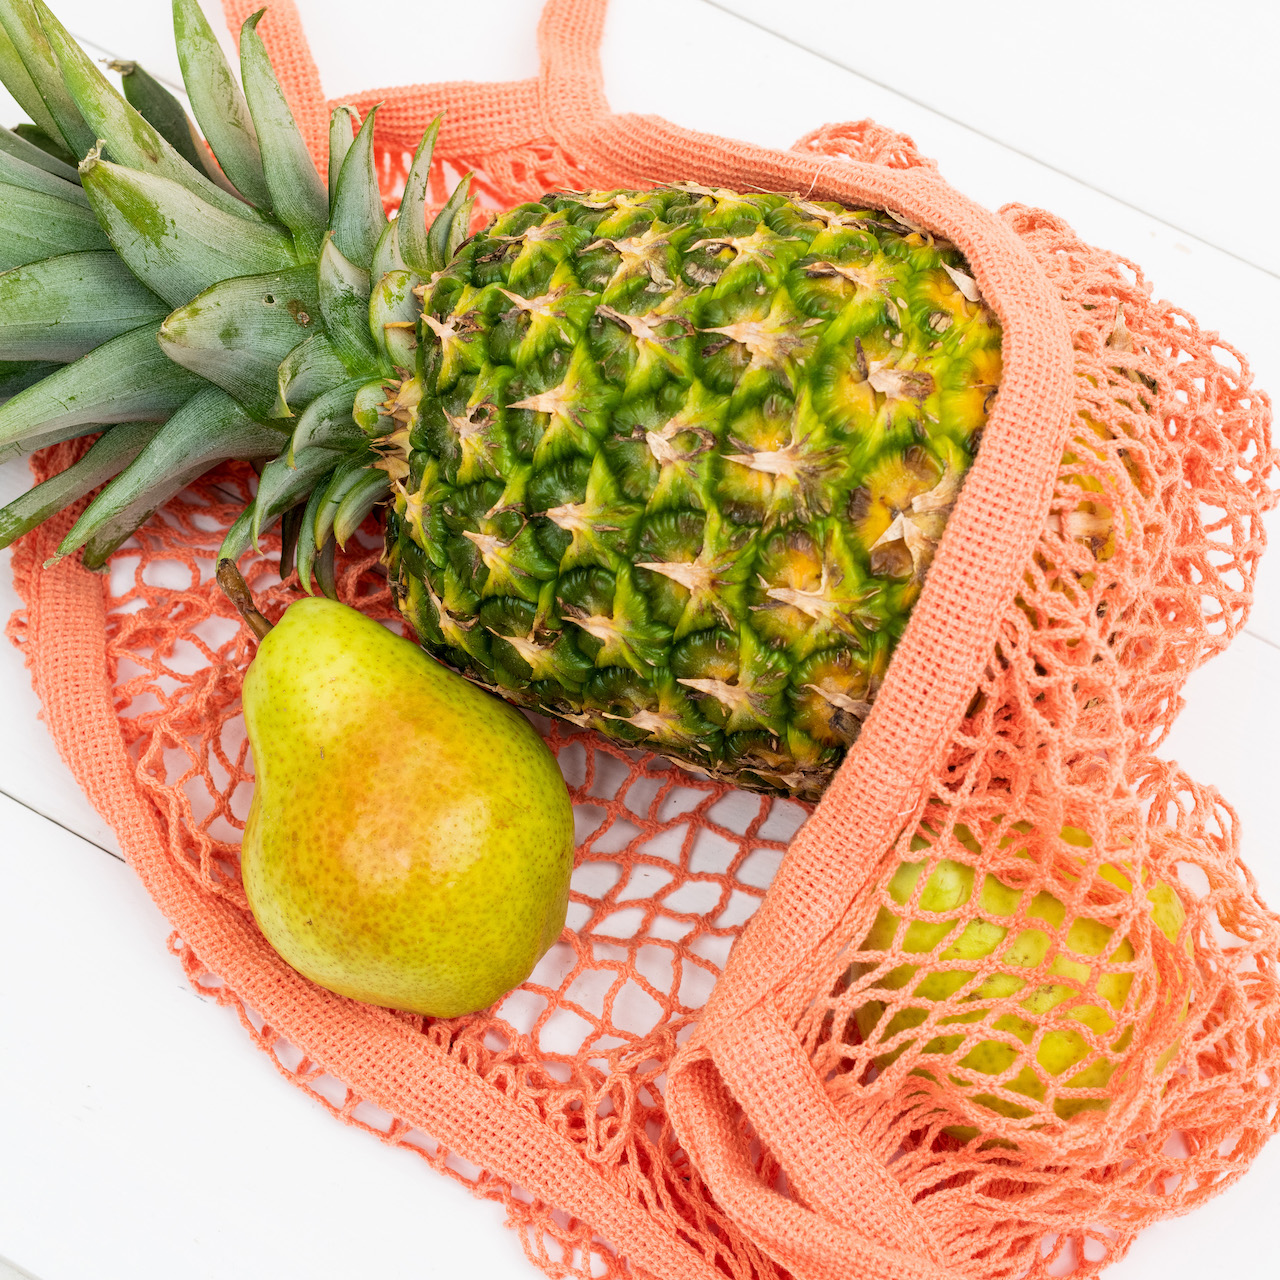 A pineapple and pears in a pink reusable grocery bag